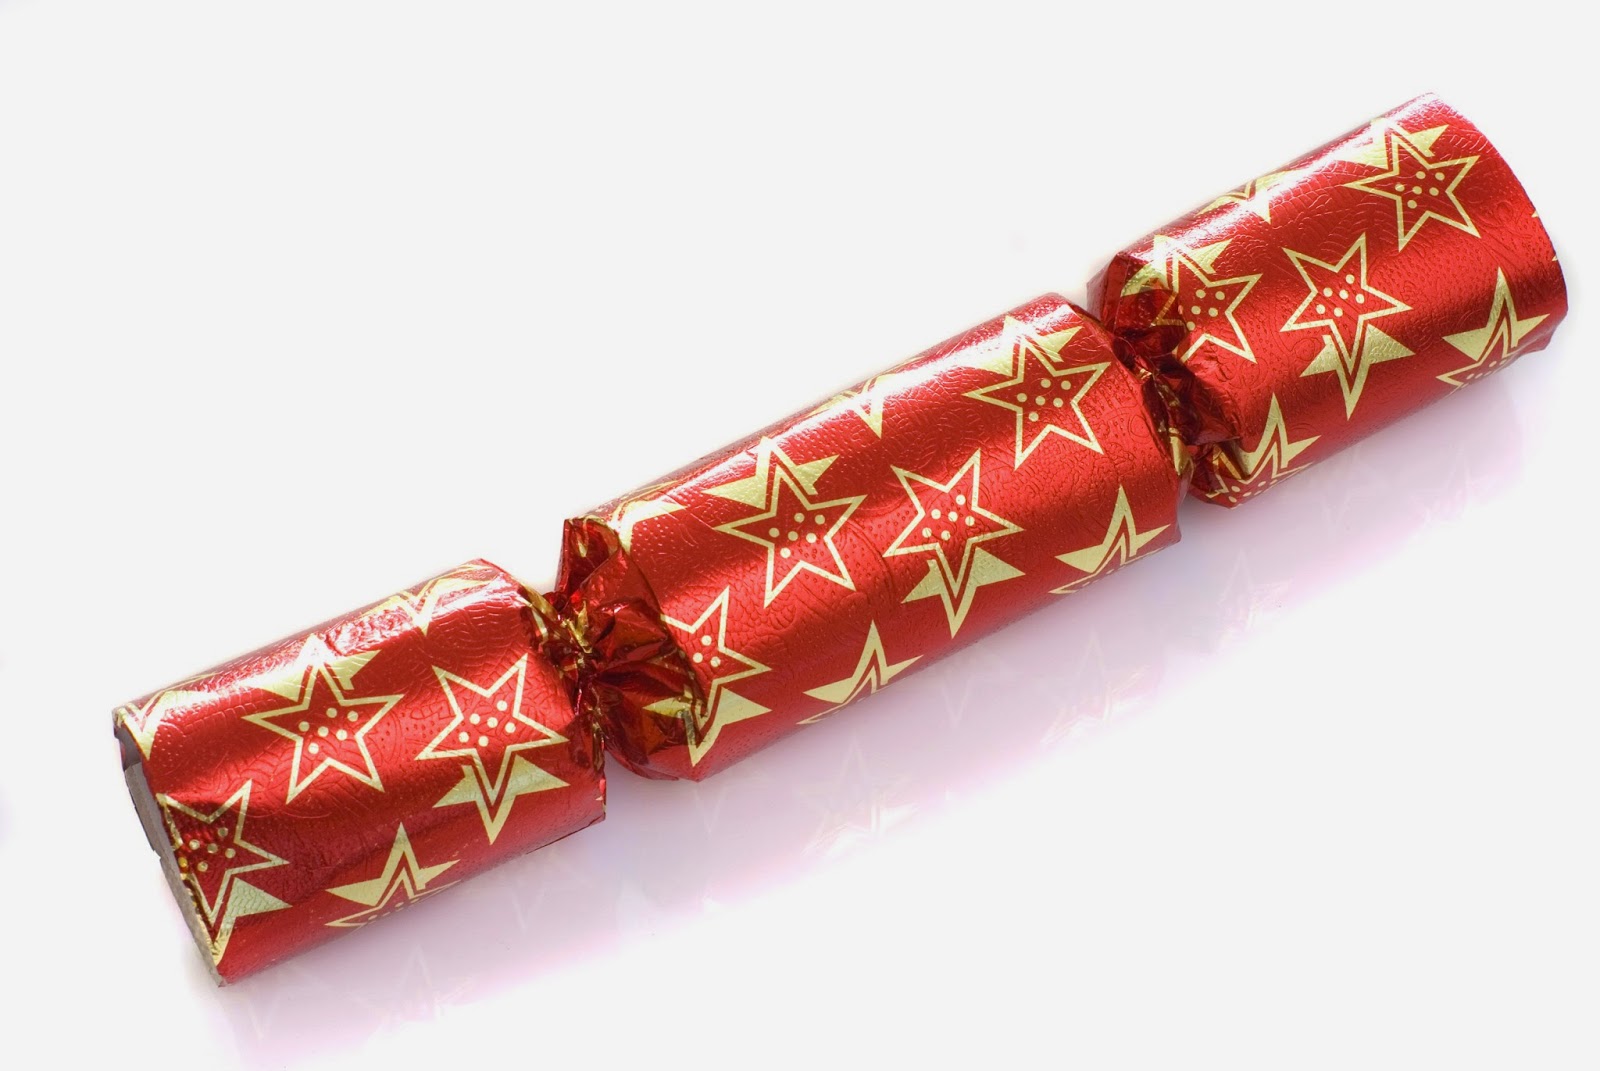 Christmas Crackers are used to decorate the table at Christmas dinner. A cracker is a small cardboard tube covered in a brightly coloured twist of paper.